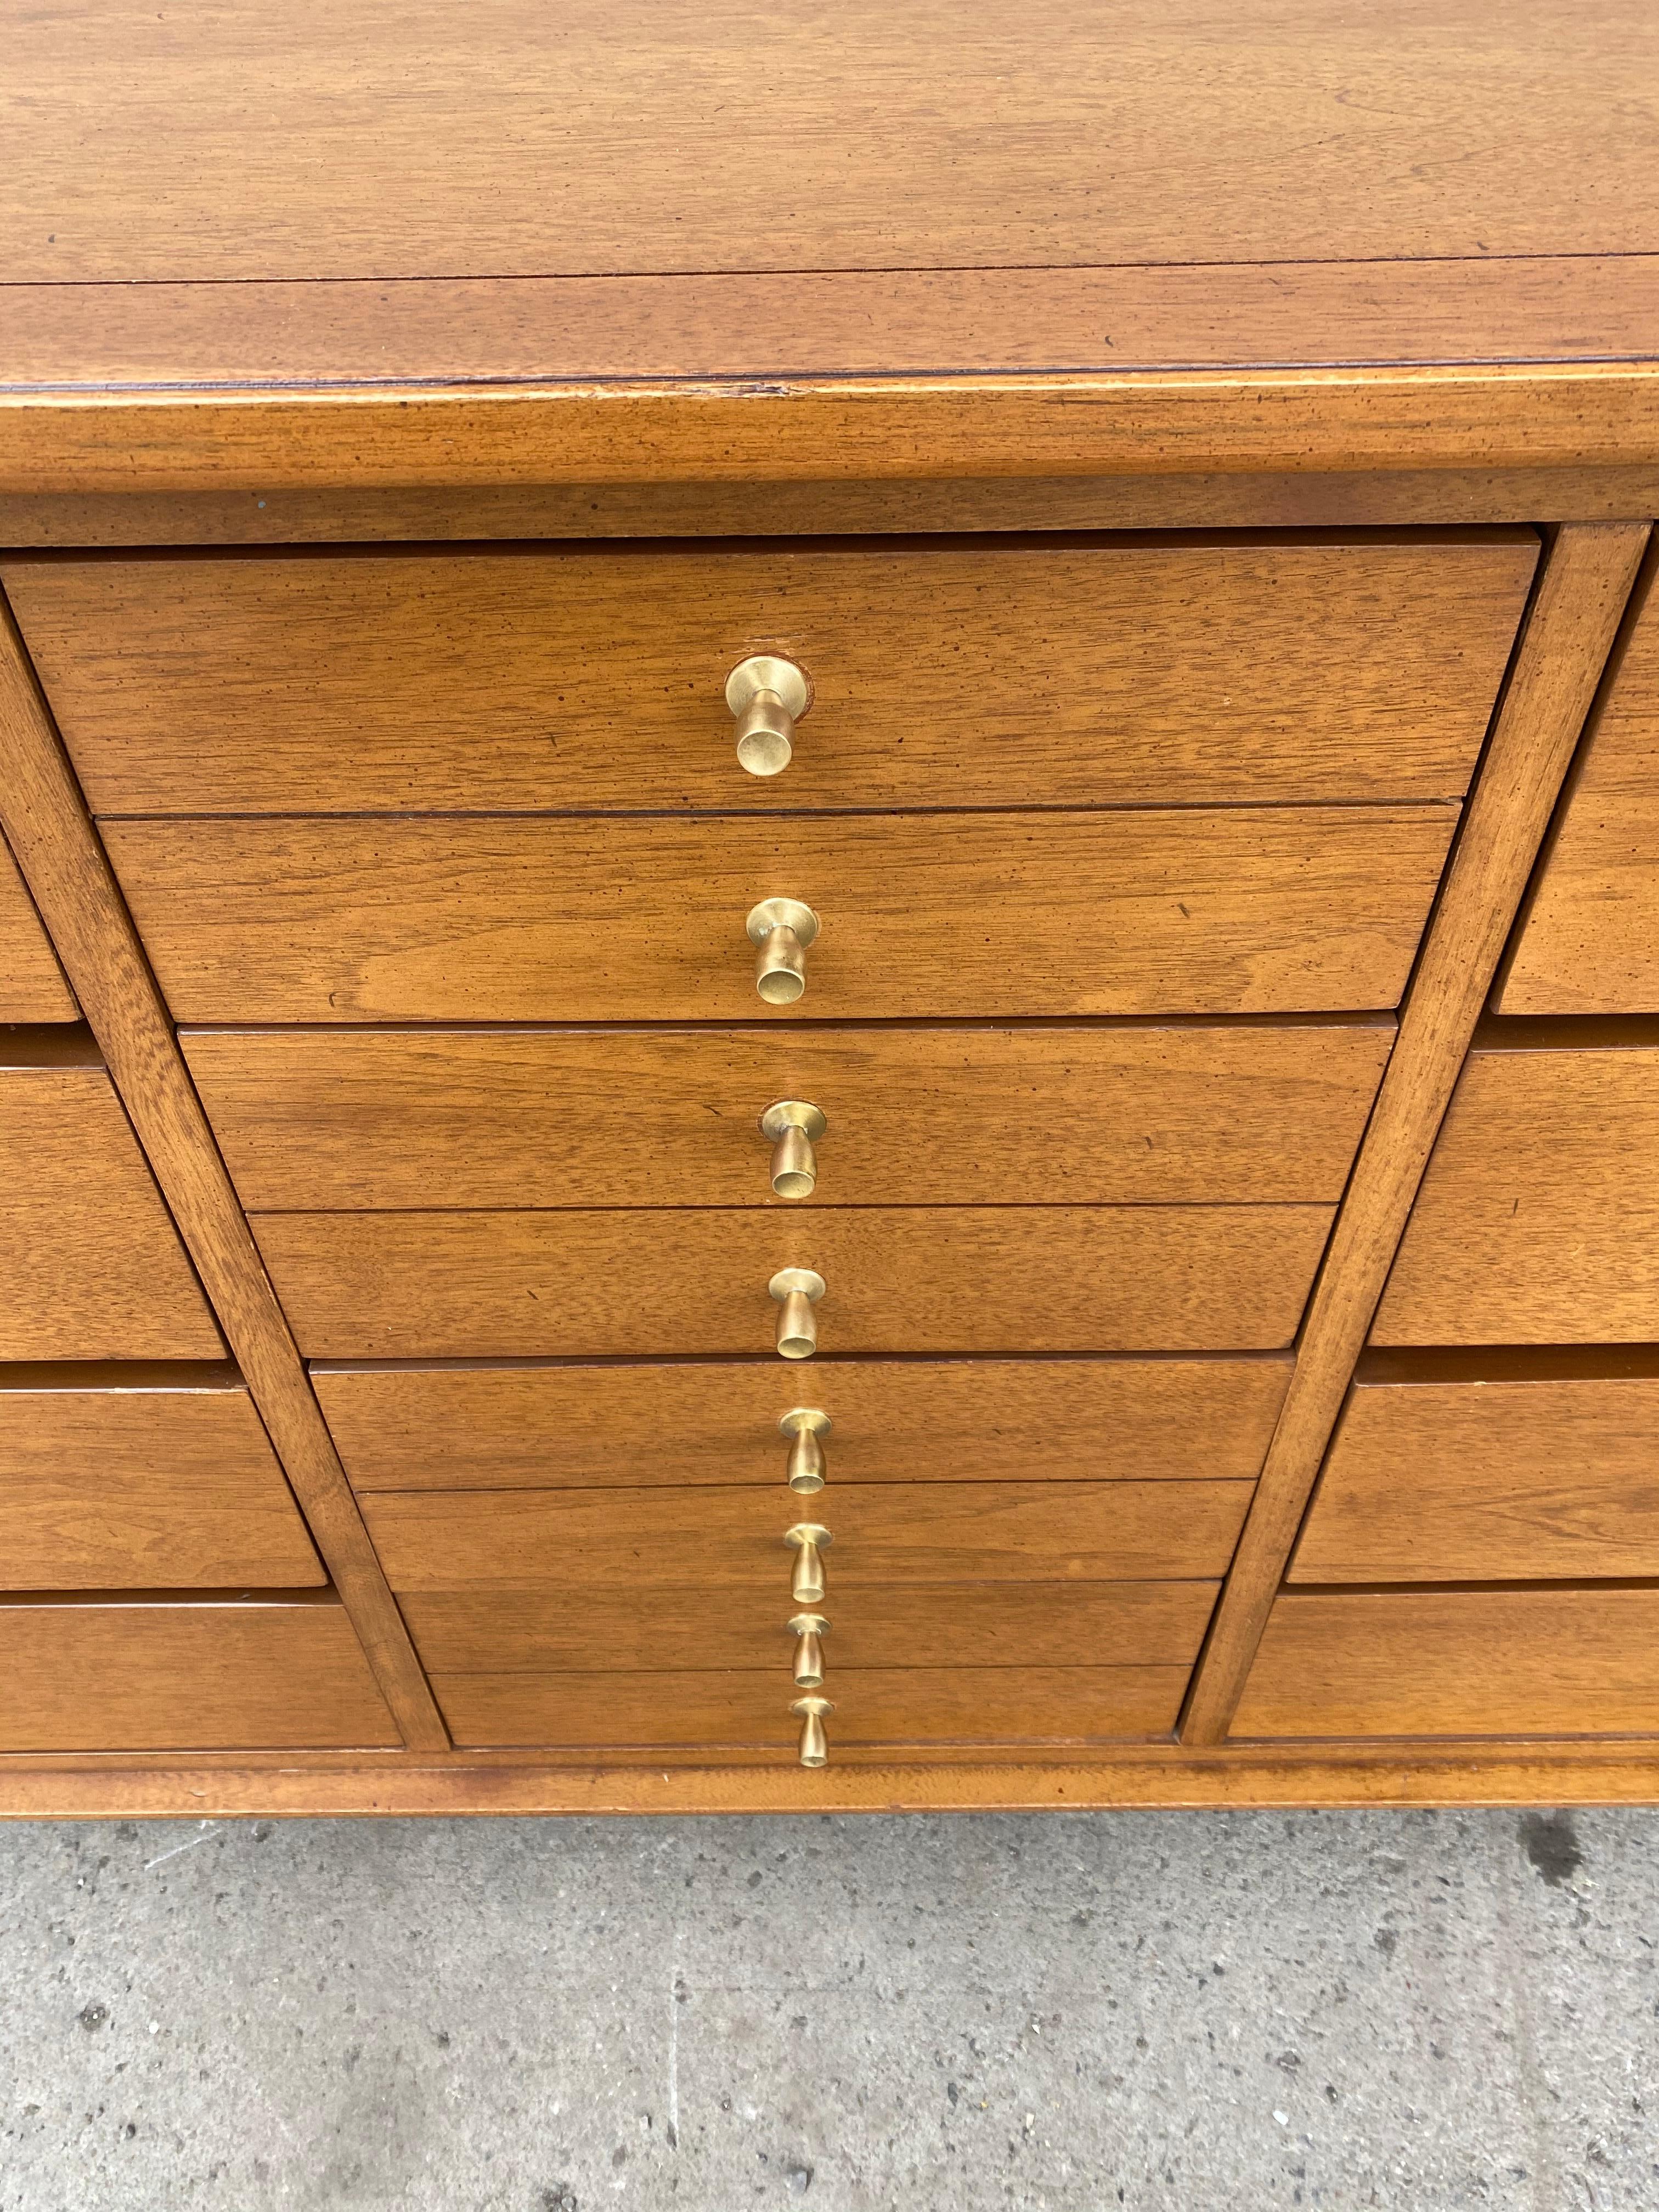 Classic modernist 12-drawer dresser by Lane, Classic Mid-Century Modern design, superior quality and construction, dove-tail drawers, beautiful brass hardware, hand delivery avail to New York City or anywhere en route from Buffalo New York.